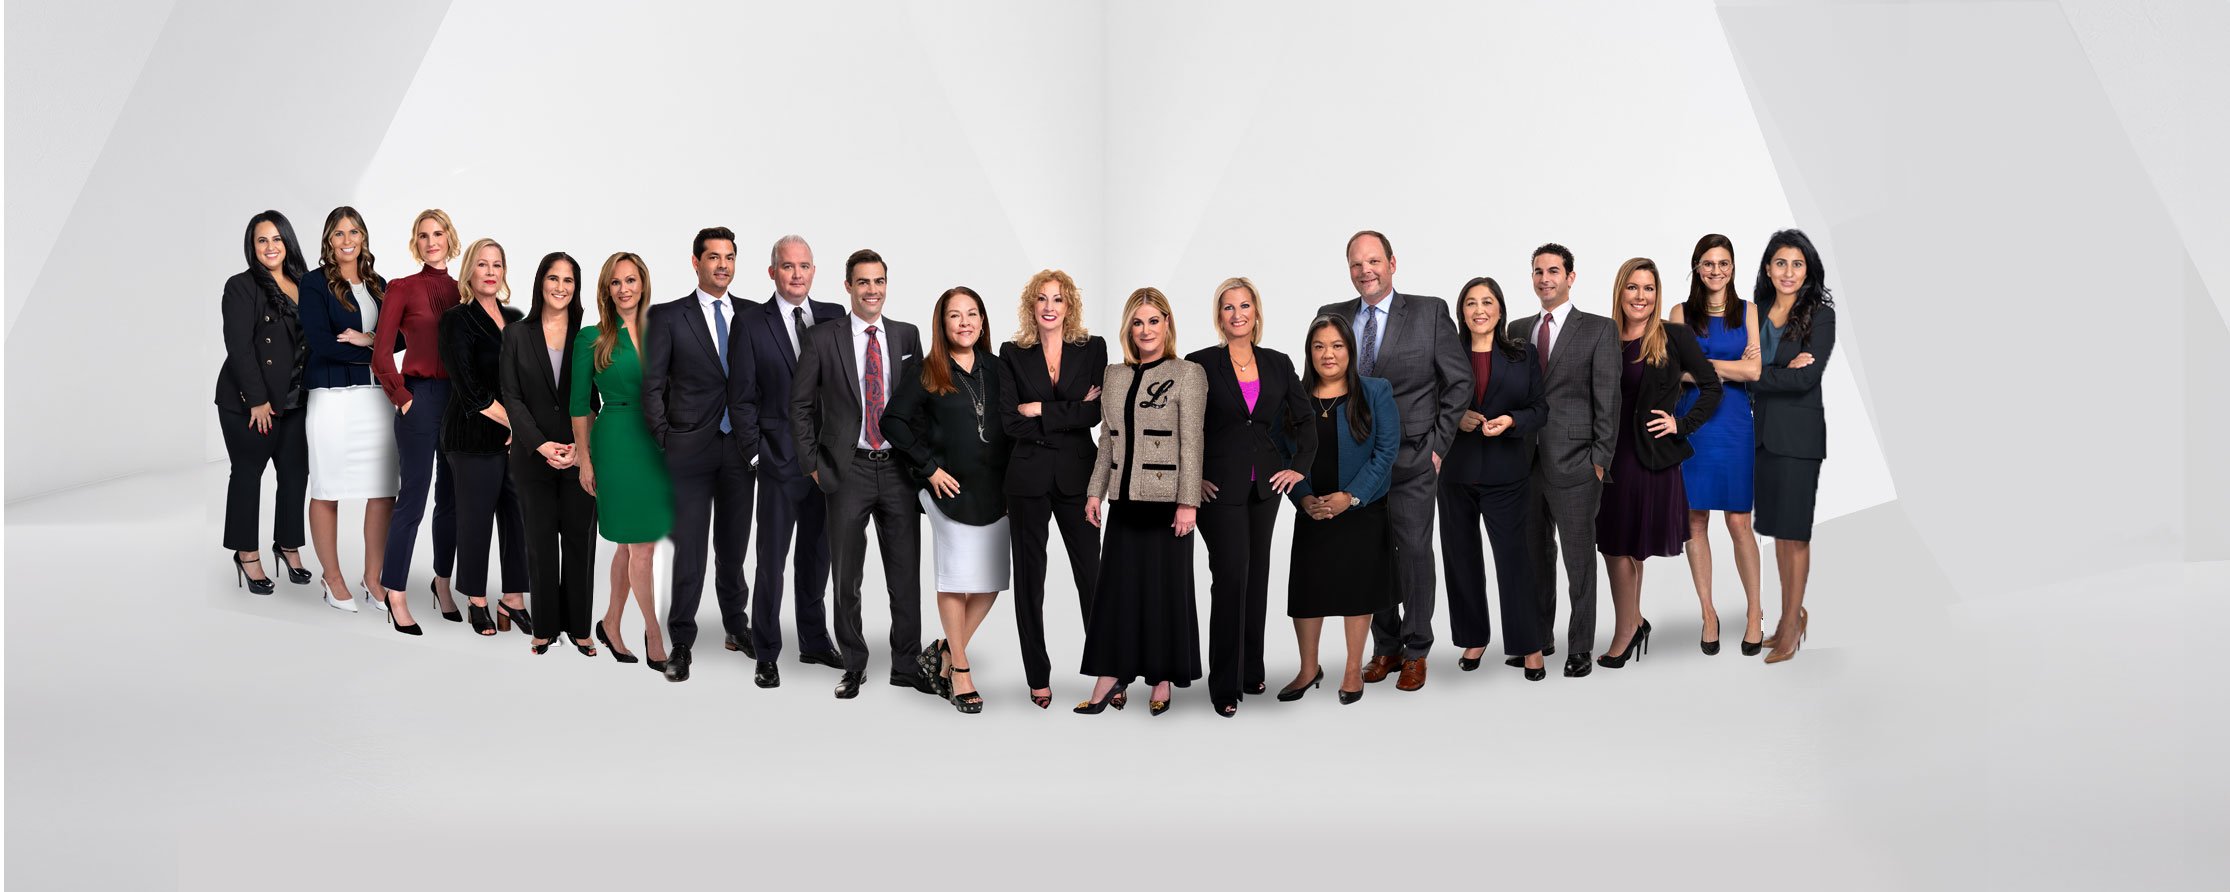 Group Photo of professionals at Law Offices Of Meyer, Olson, Lowy & Meyers, LLP